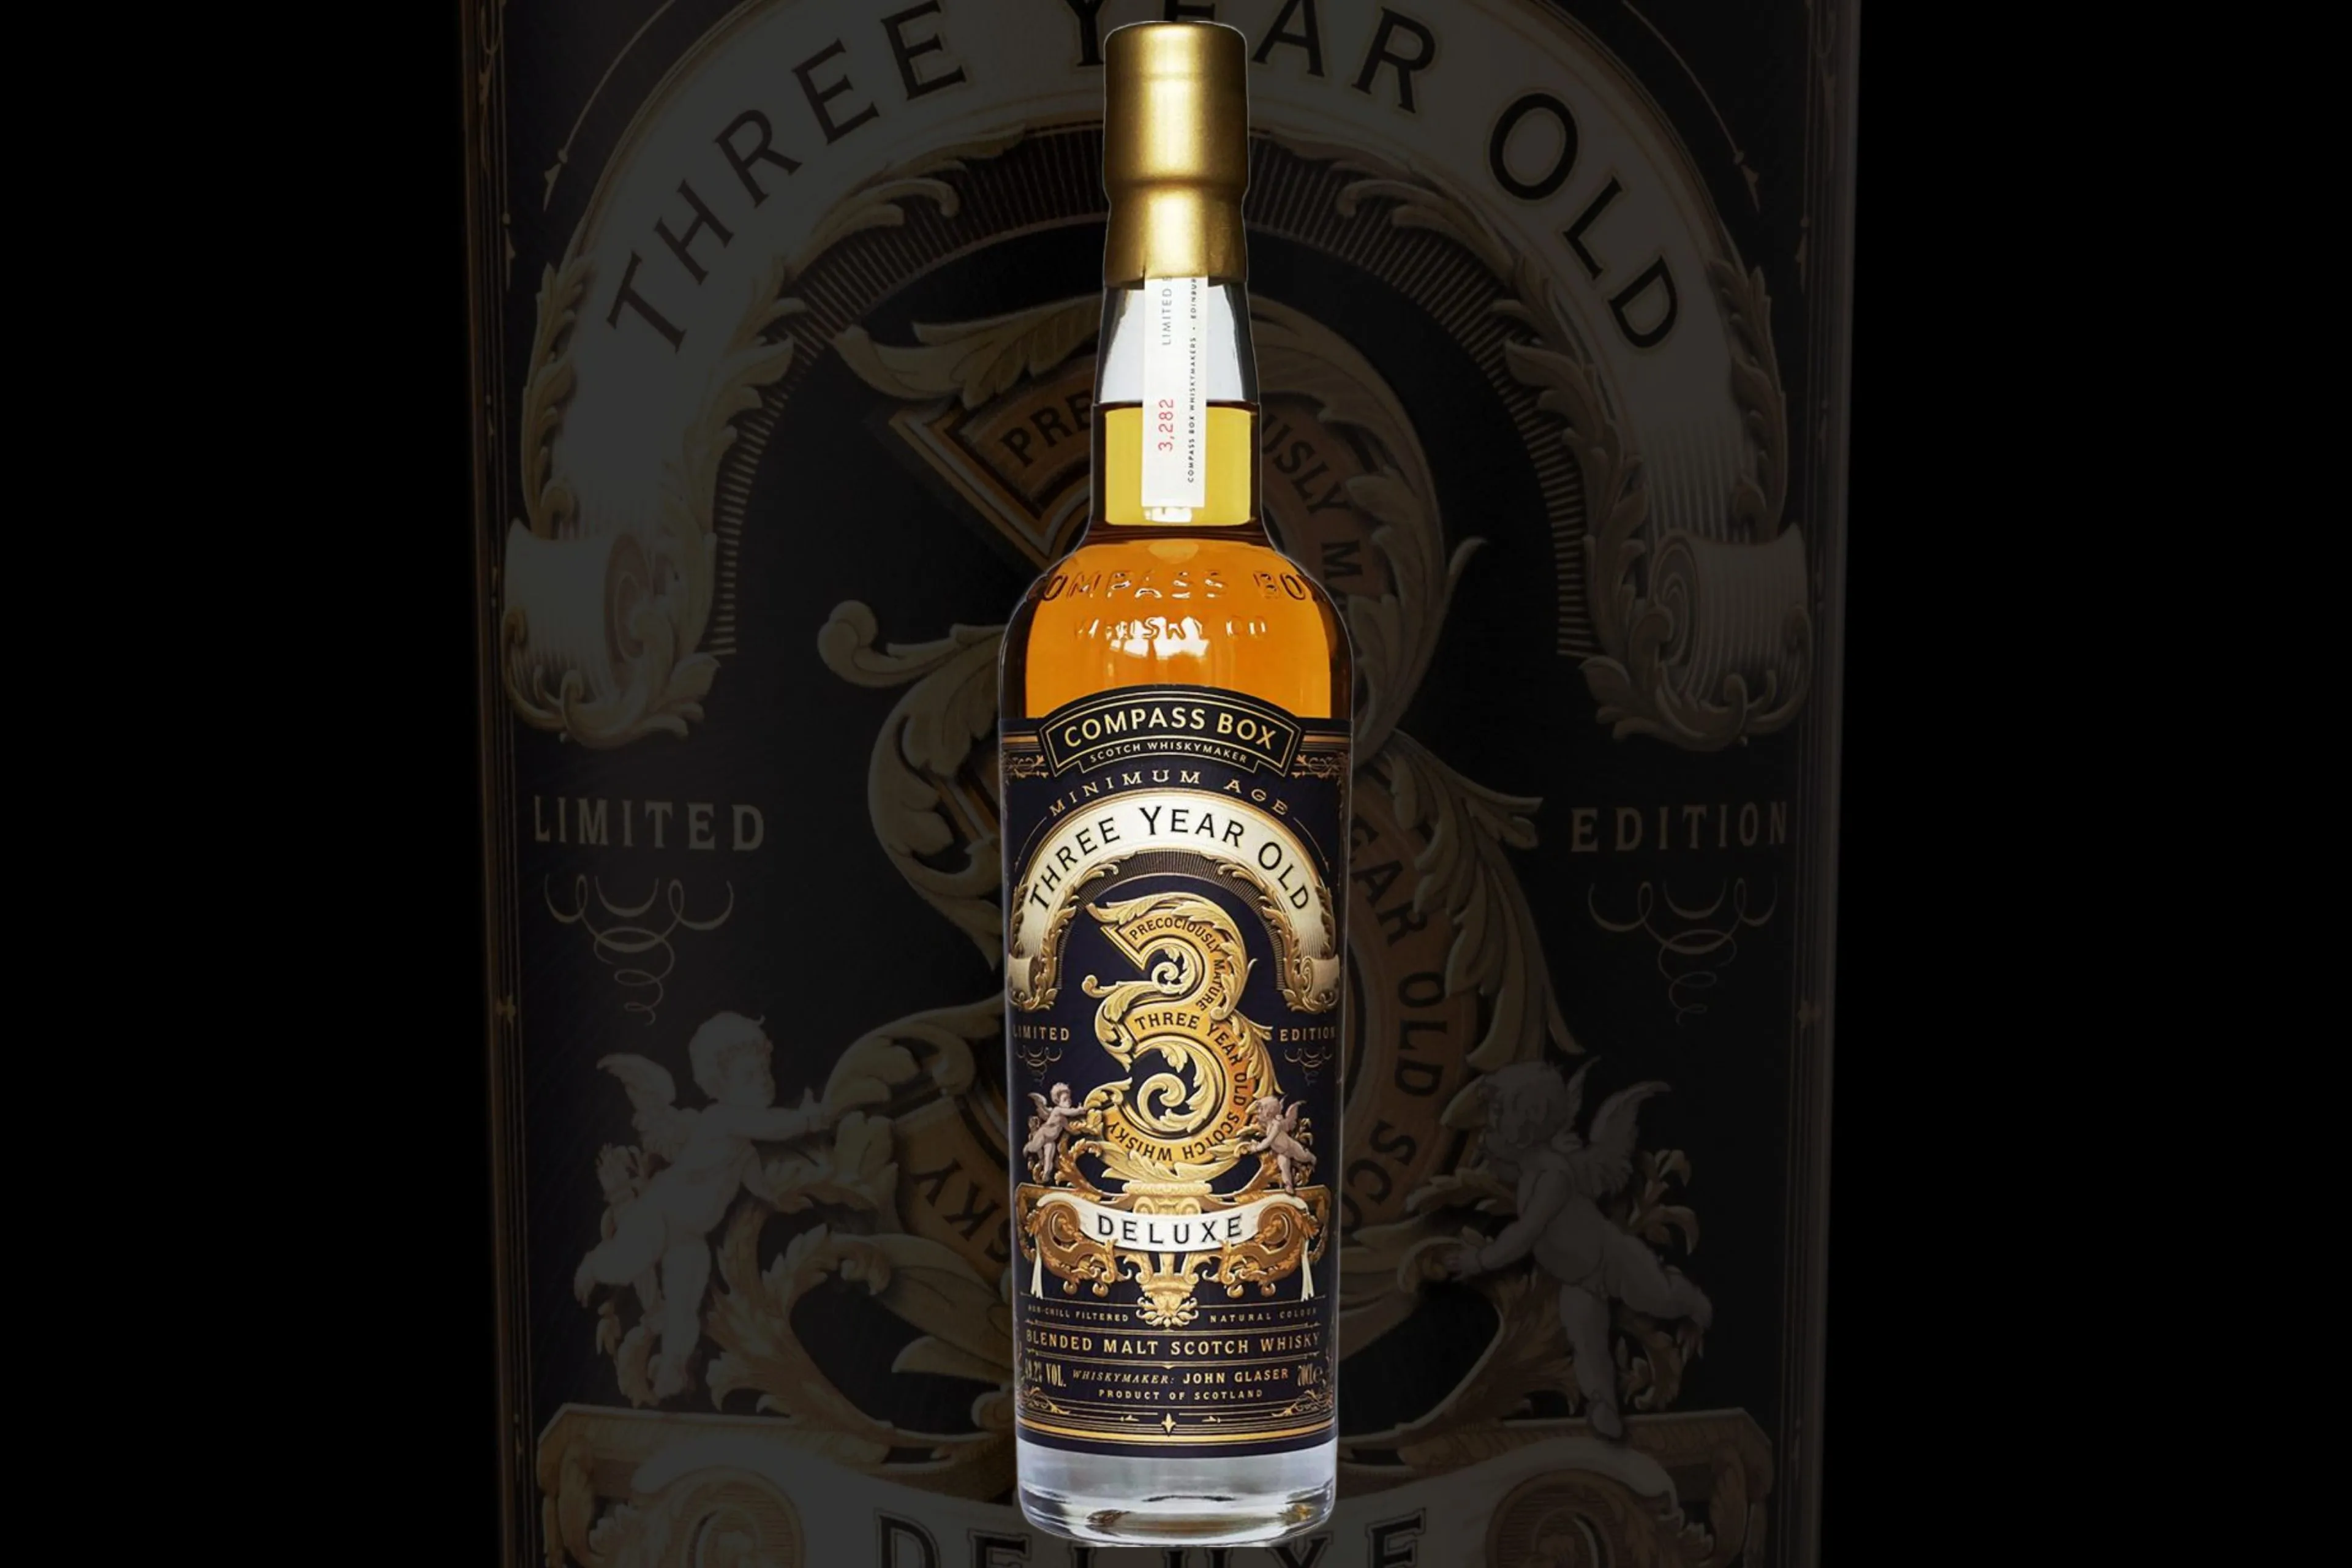 compass box three year old deluxe whisky